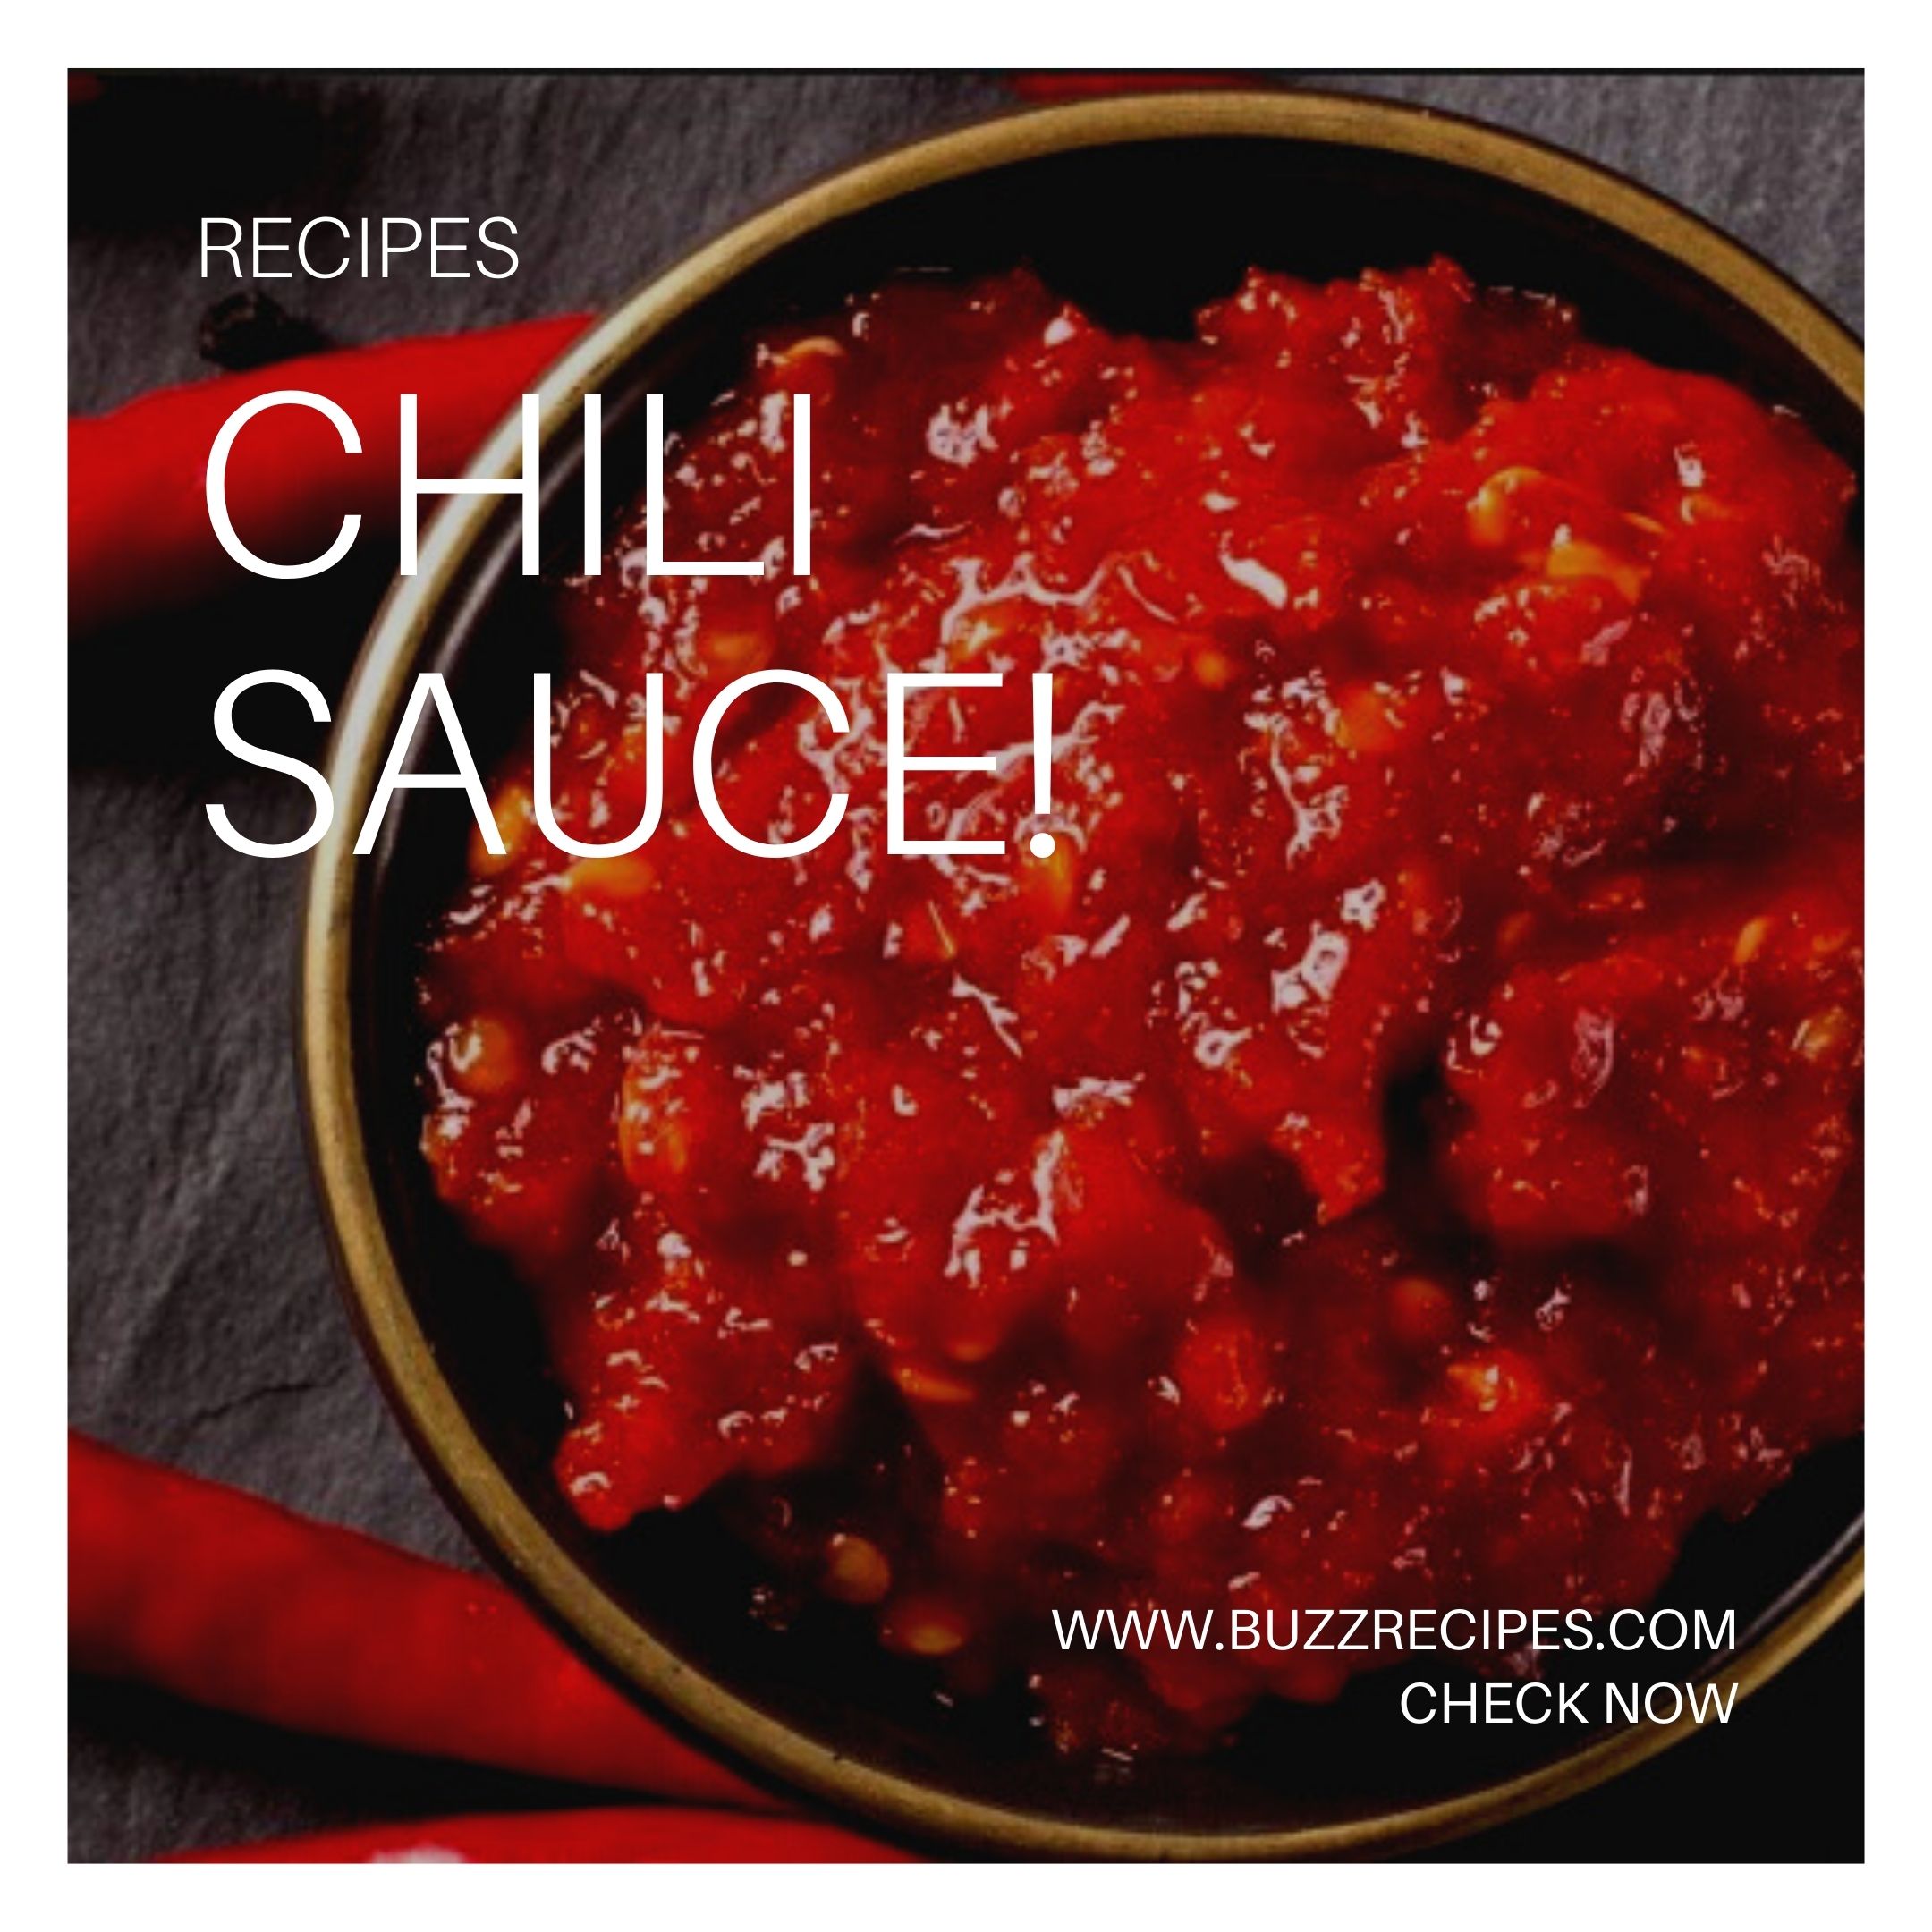 How To Make Roasted Red Chili Sauce – The Recipe Method